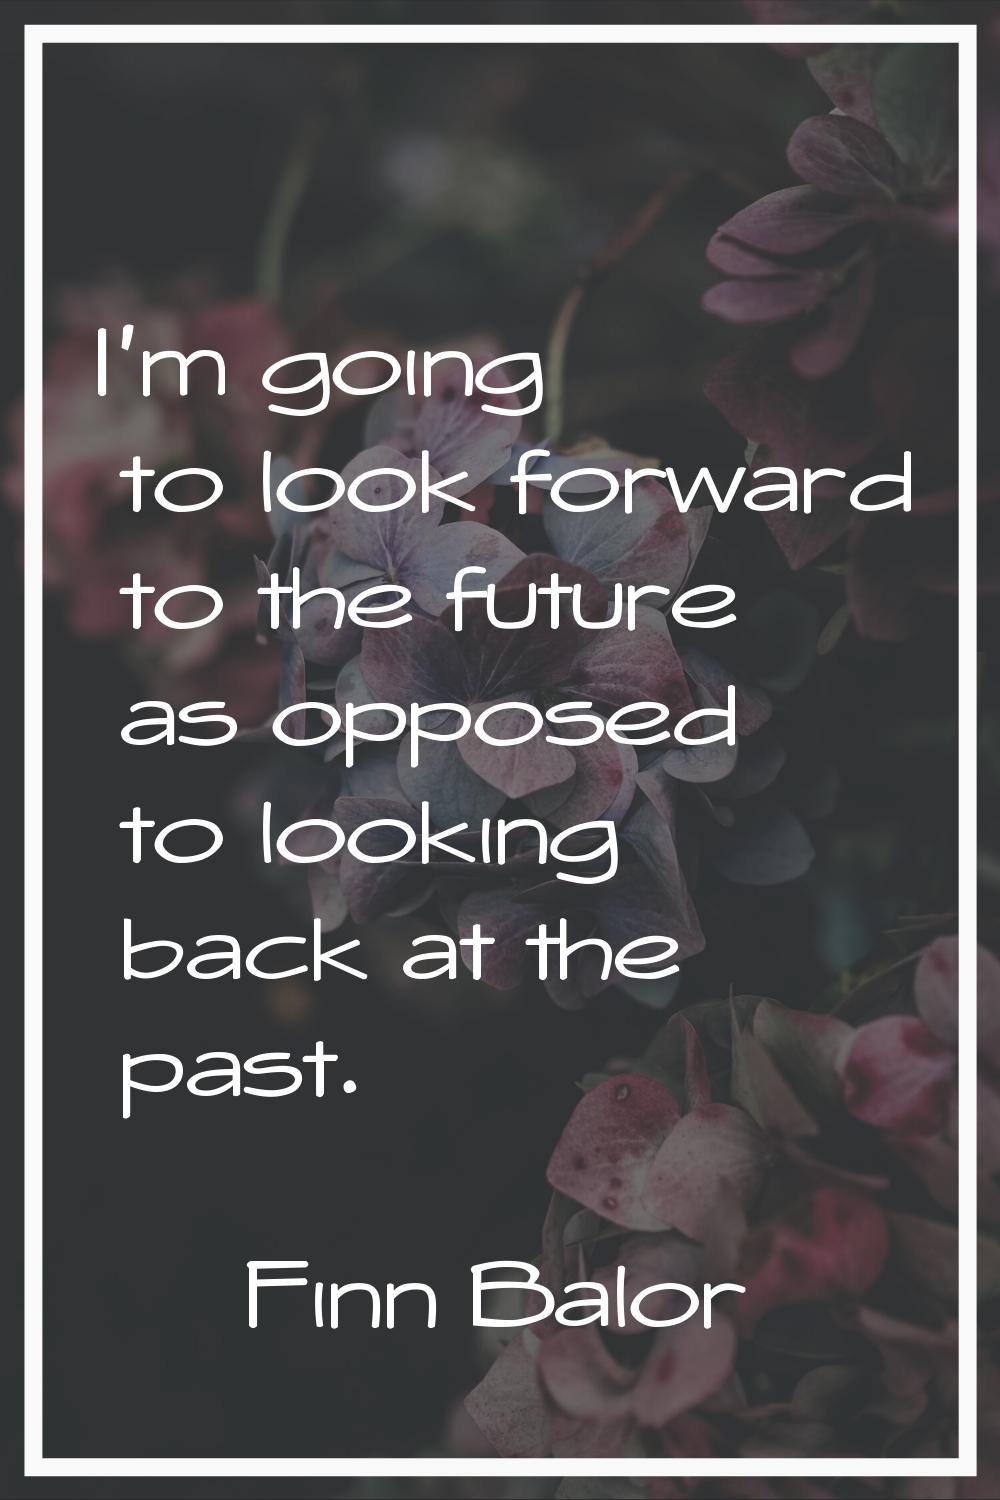 I'm going to look forward to the future as opposed to looking back at the past.